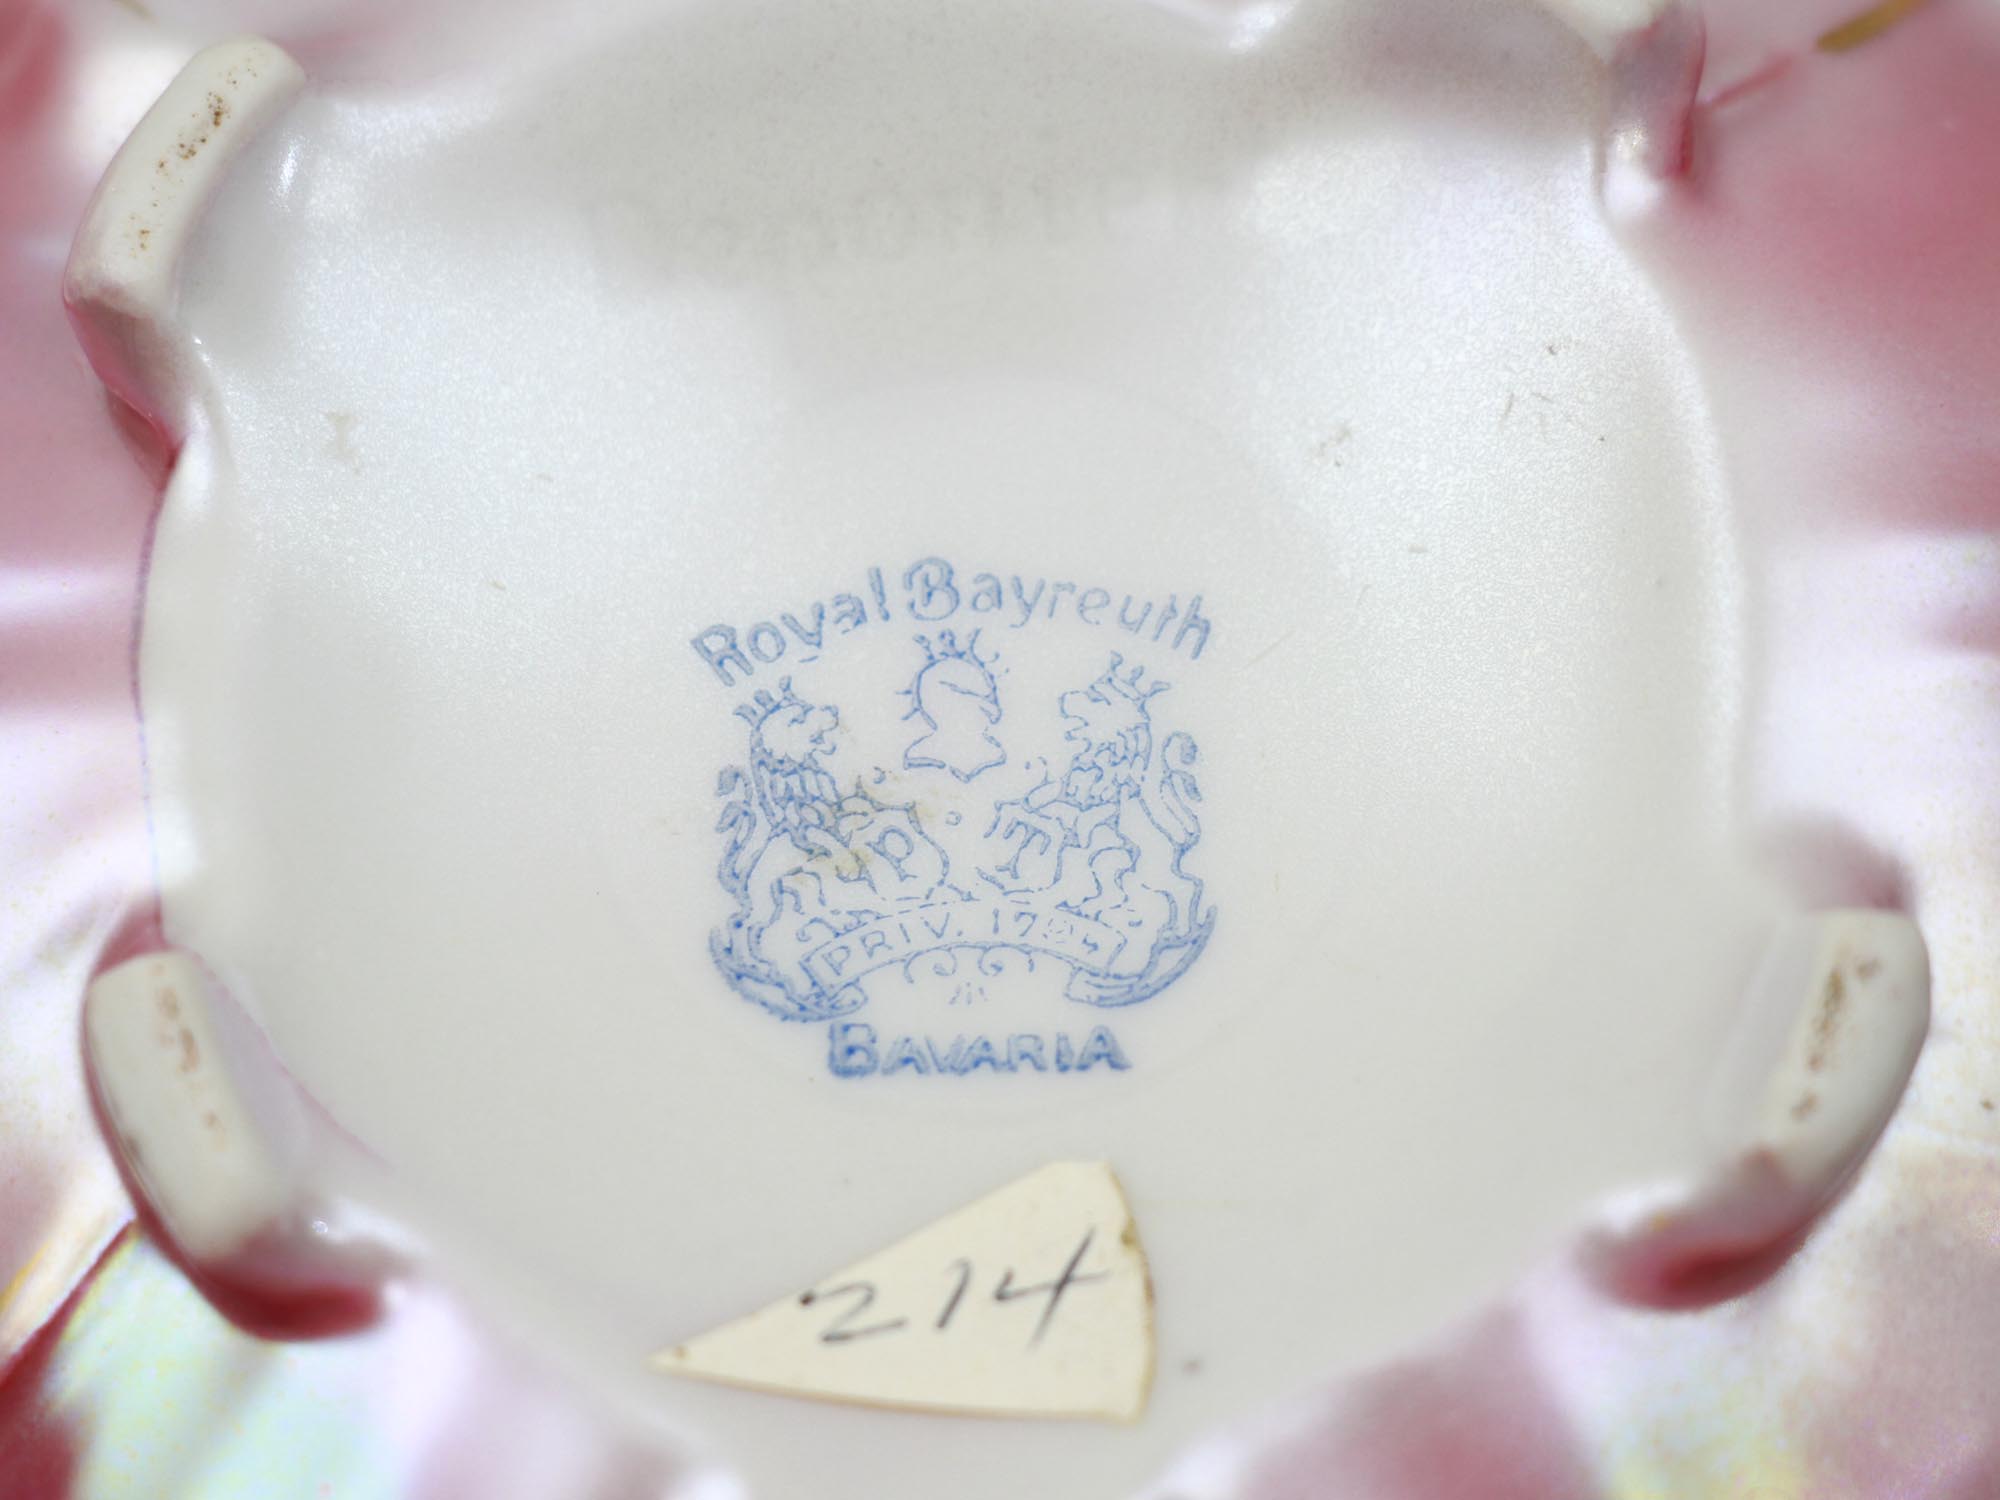 SET OF TWO ROYAL BAYREUTH PORCELAIN POPPY PIECES PIC-4